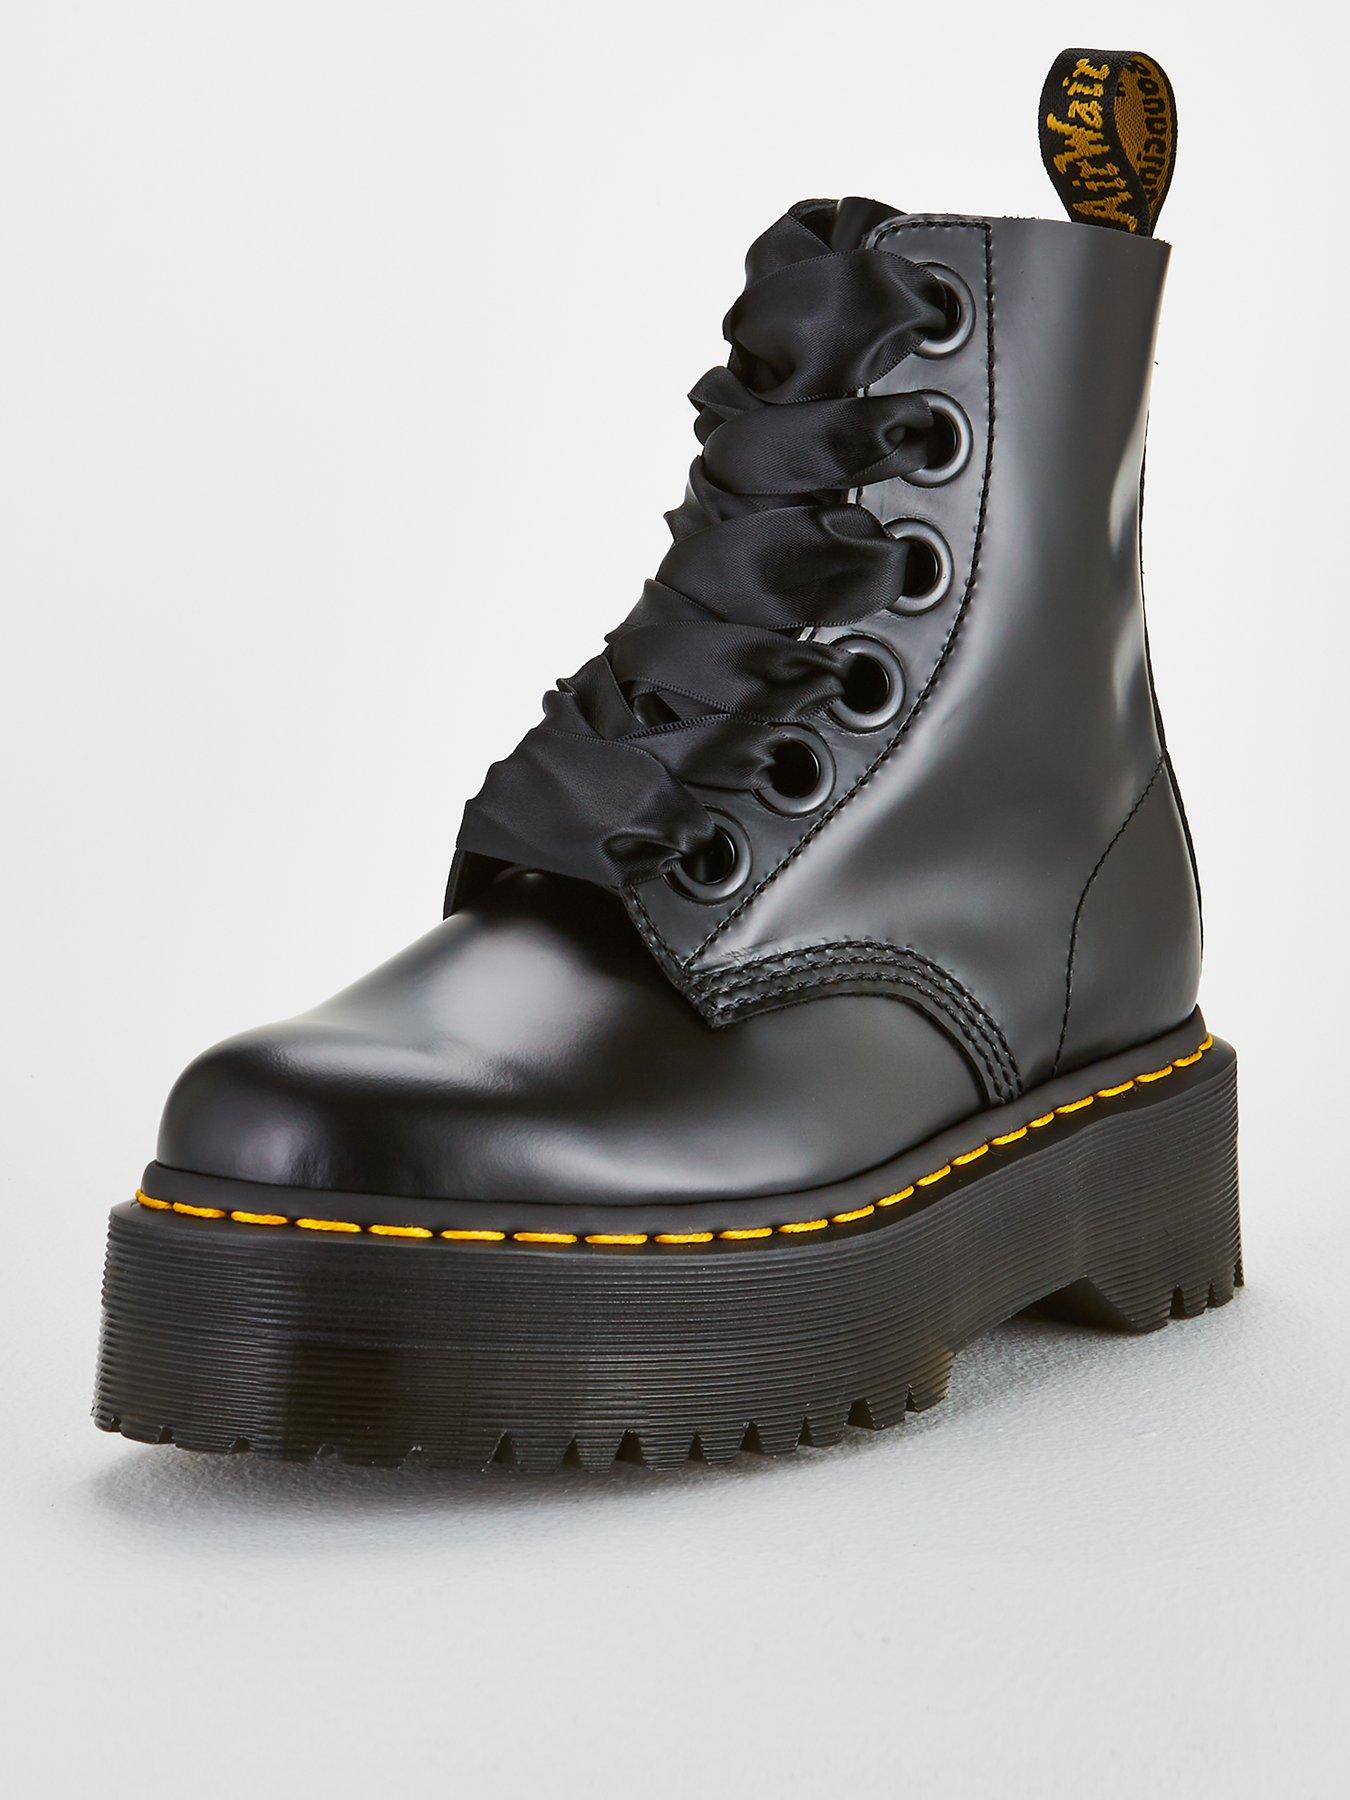 Dr Martens Women's Boots | Very.co.uk